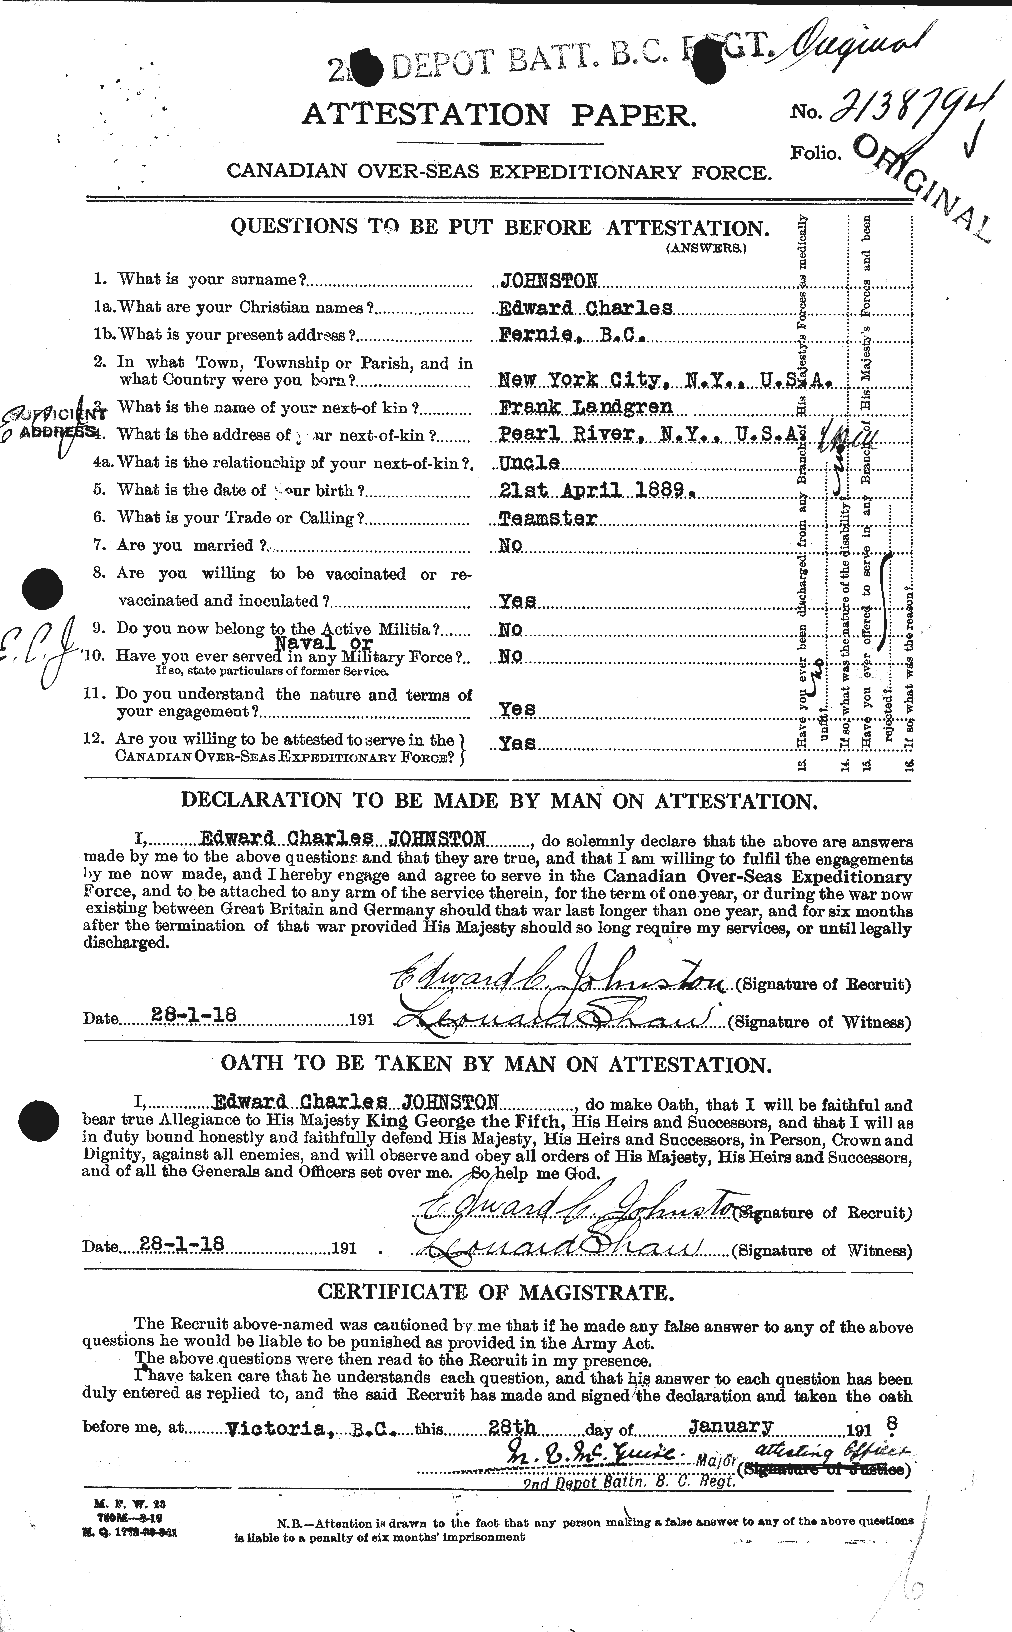 Personnel Records of the First World War - CEF 423225a